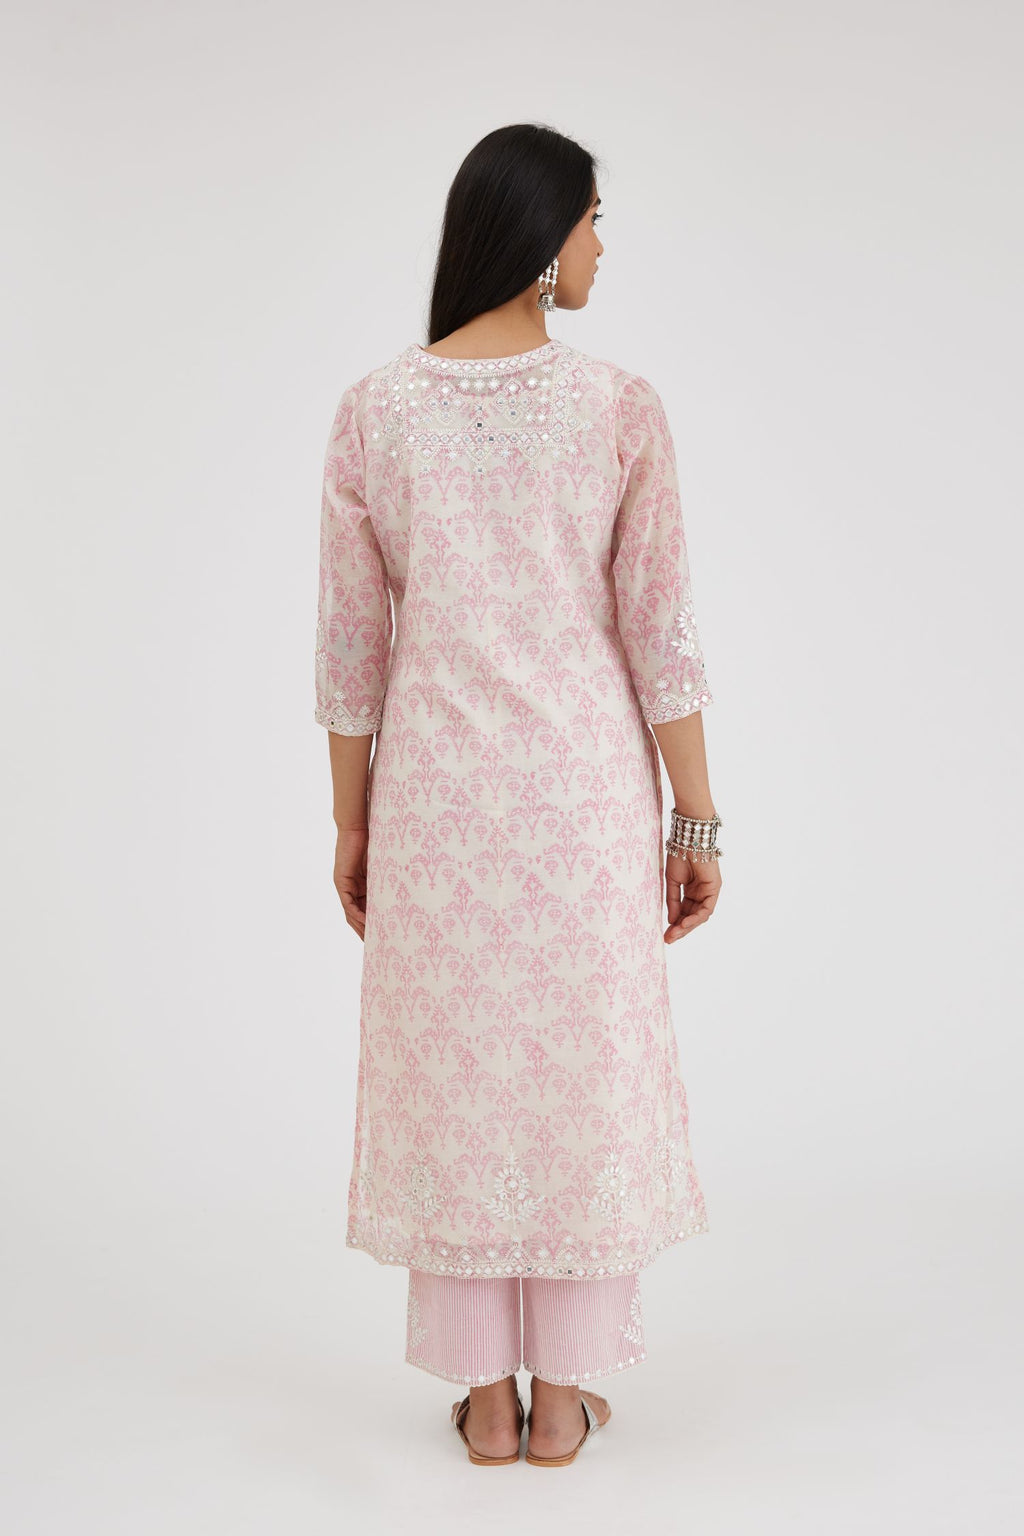 Ikat design pink and off white hand block-printed Cotton Chanderi straight long kurta set, highlighted with off-white thread and mirror embroidery.